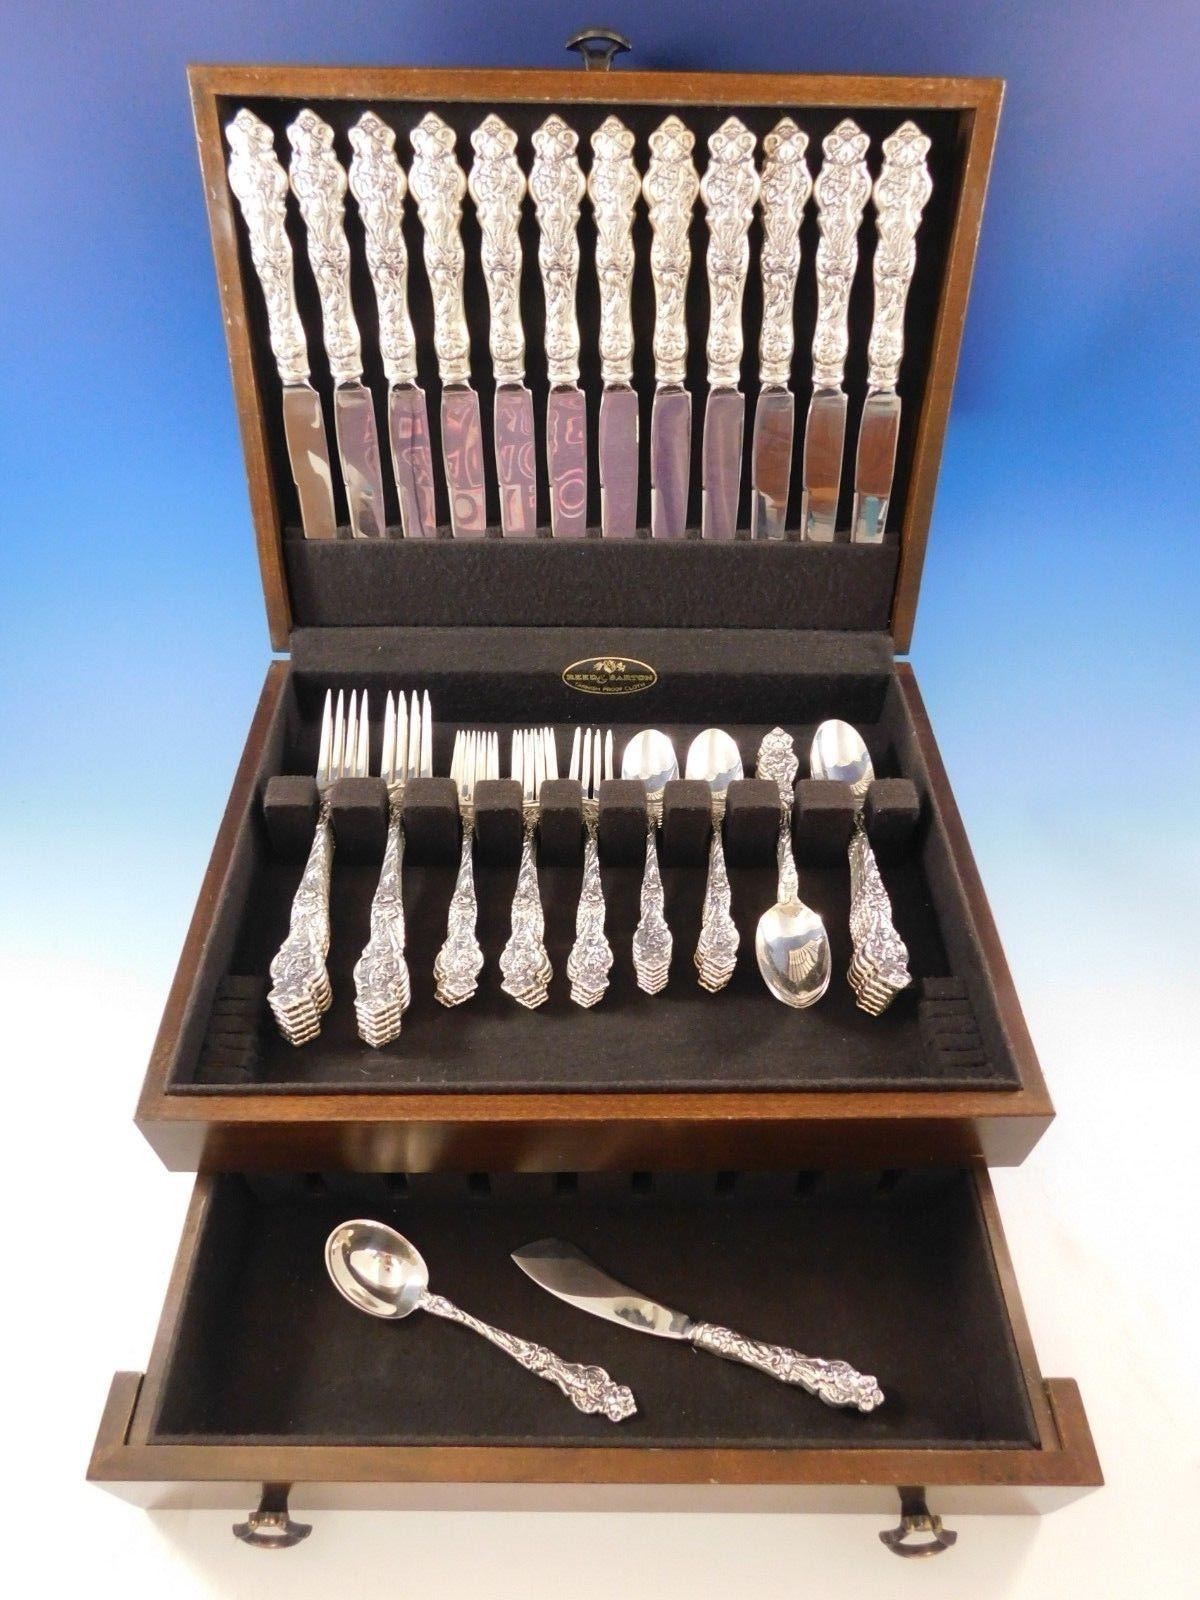 Absolutely stunning dinner size Irian by Wallace sterling silver flatware set, 62 pieces. This set includes:

12 dinner size knives, 10 1/2